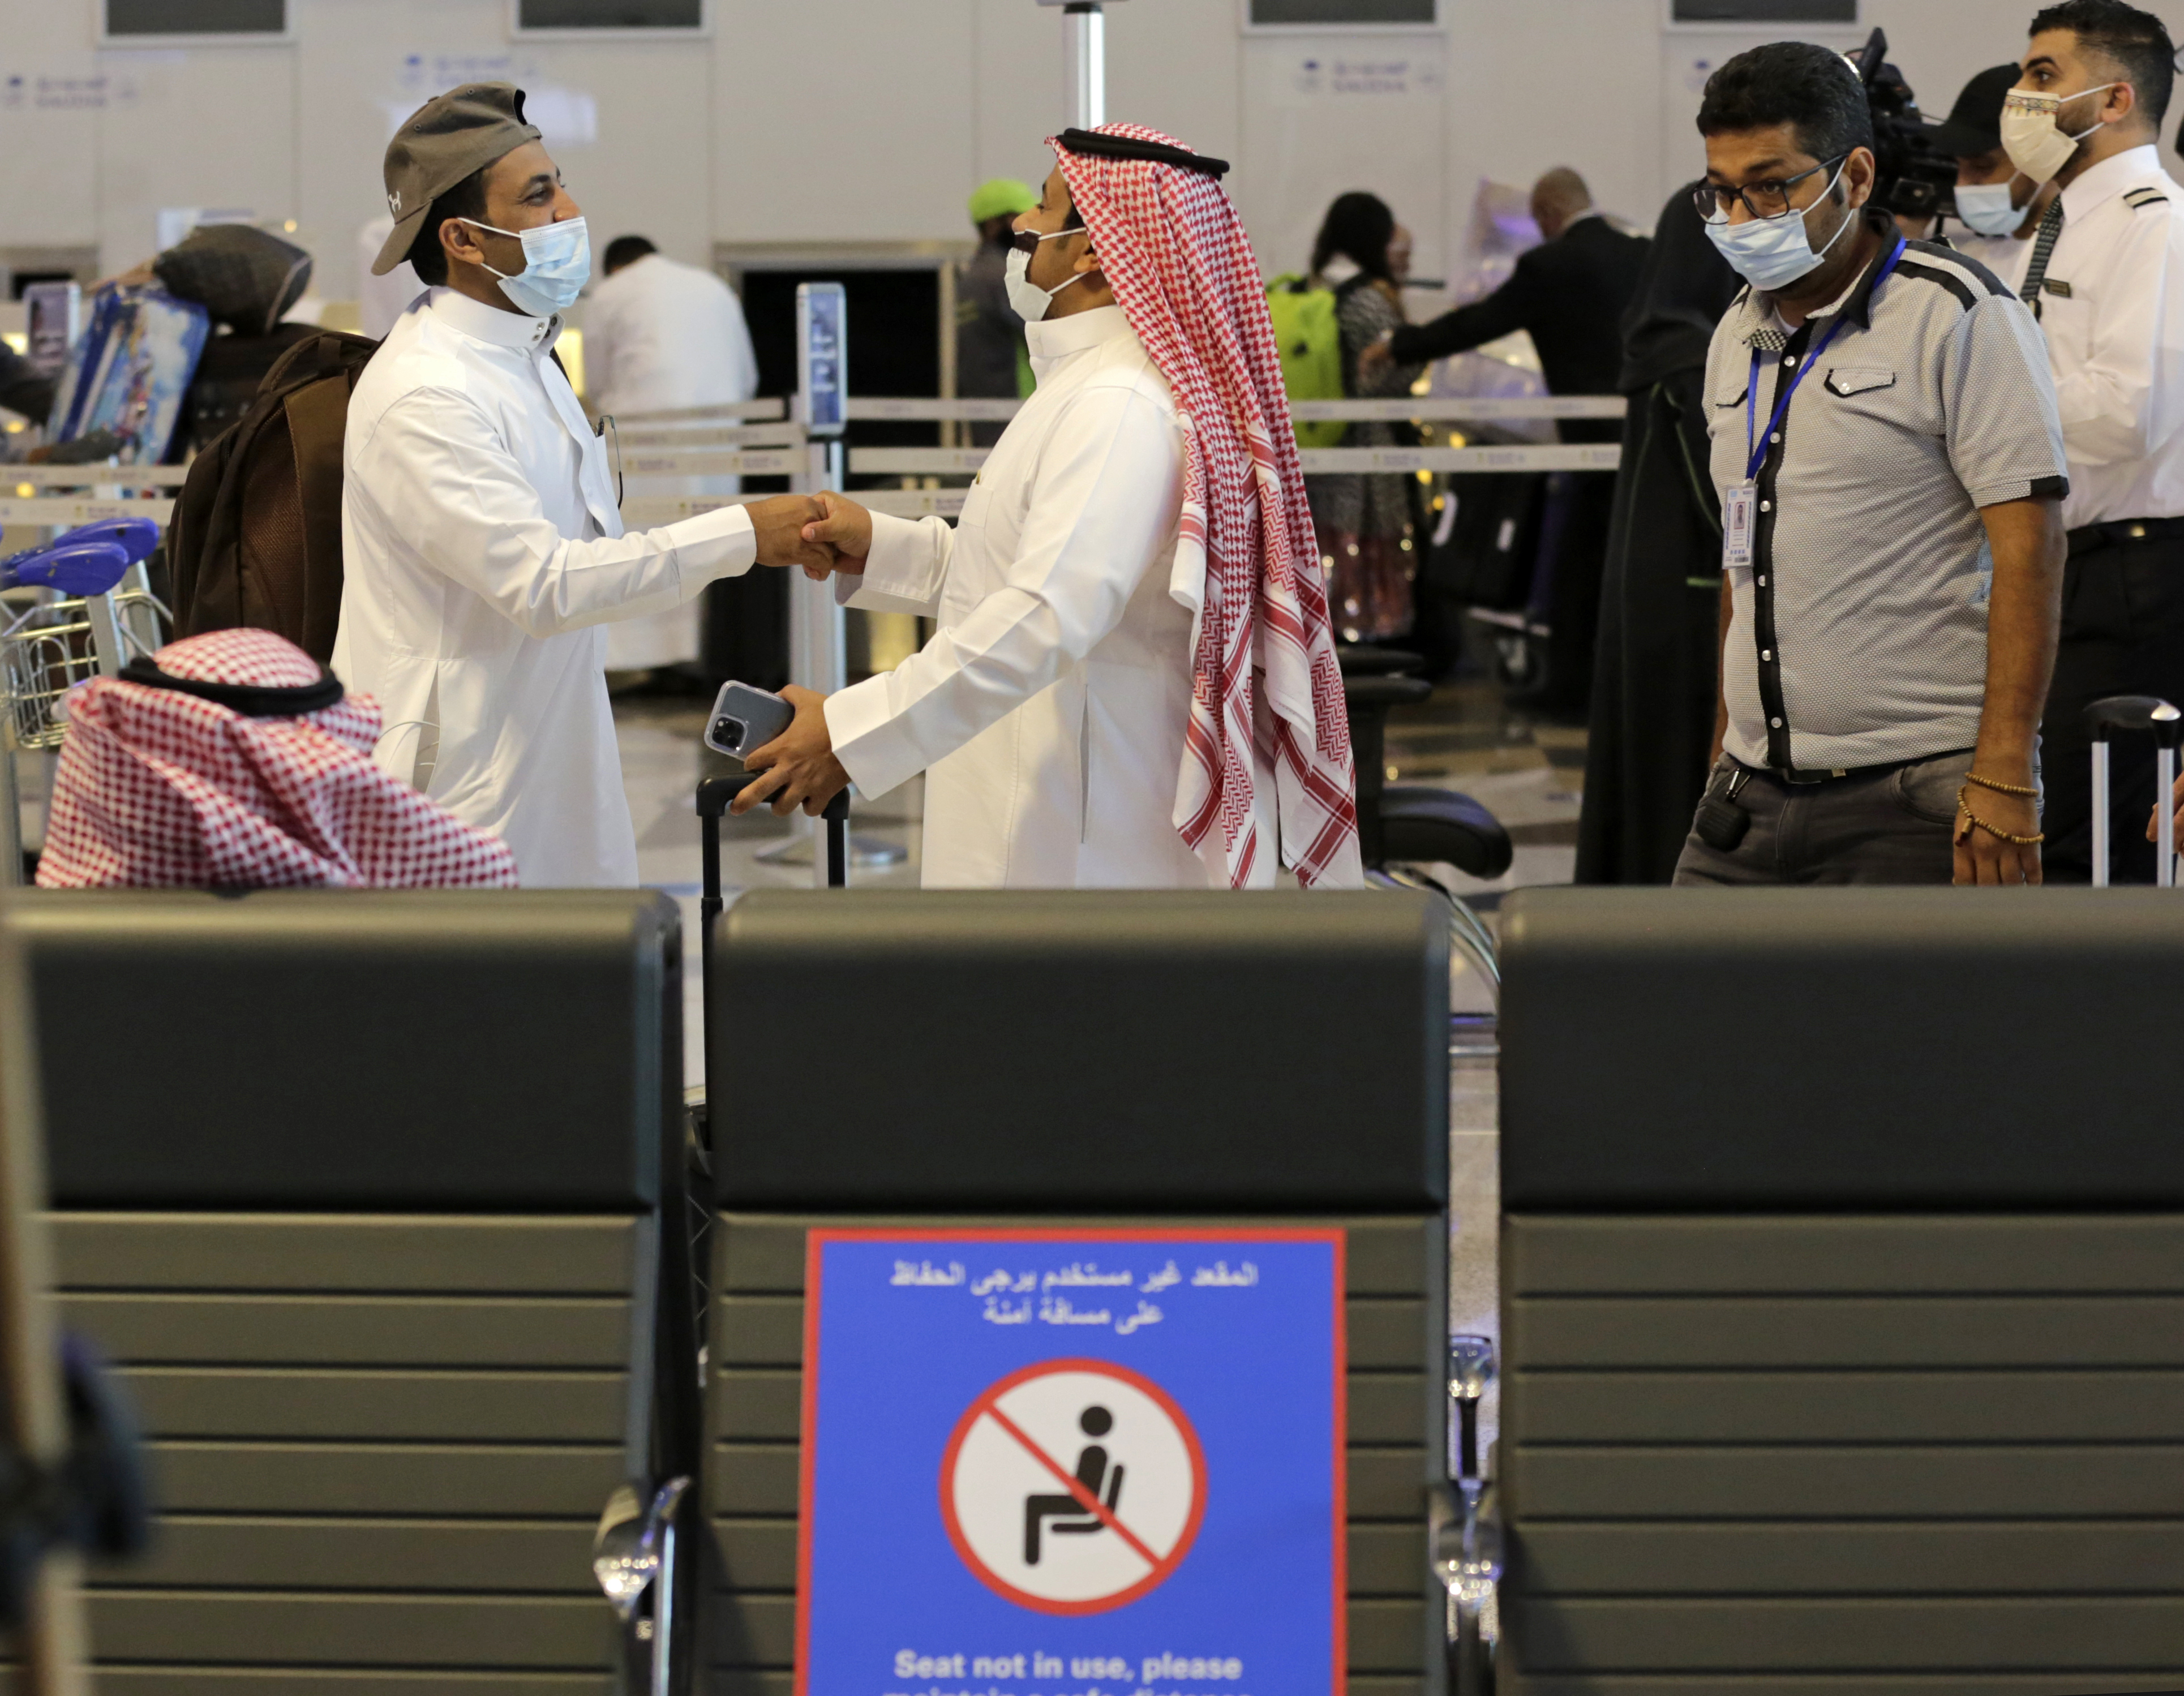 Saudi passengers greet each other as they prepare to fly out of King Abdulaziz International Airport, in Jiddah, Saudi Arabia, Monday, May 17, 2021. Vaccinated Saudis are allowed to leave the kingdom for the first time in more than a year as the country eases a ban on international travel that had been in place to try and contain the spread of the coronavirus and its new variants. (AP Photo/Amr Nabil)